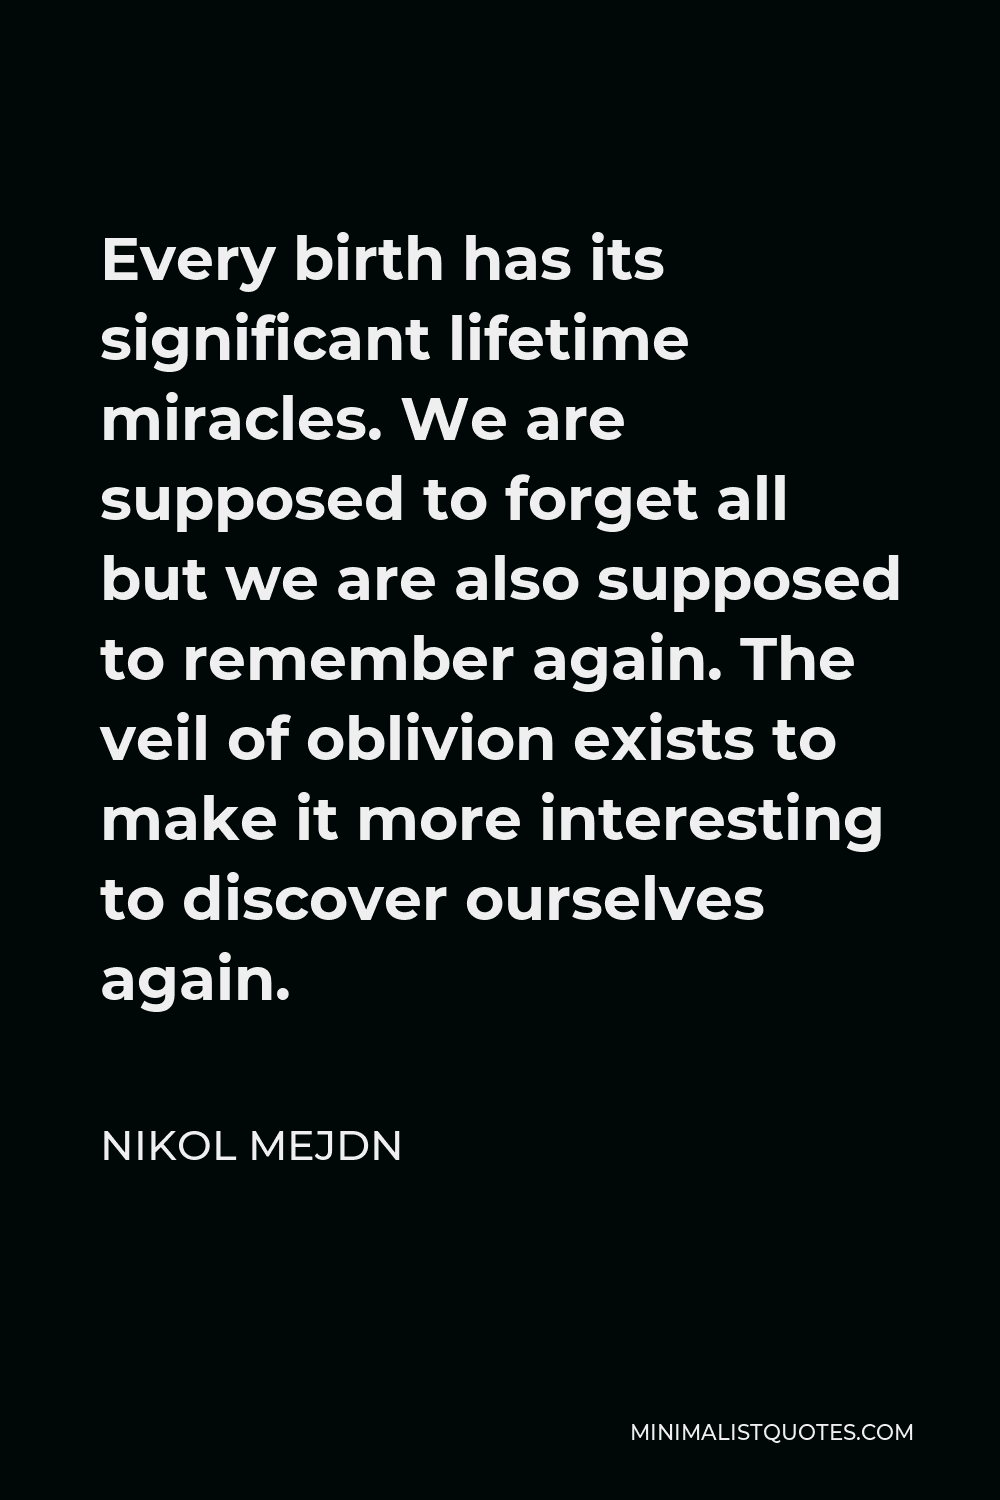 Nikol Mejdn Quote - Every birth has its significant lifetime miracles. We are supposed to forget all but we are also supposed to remember again. The veil of oblivion exists to make it more interesting to discover ourselves again.